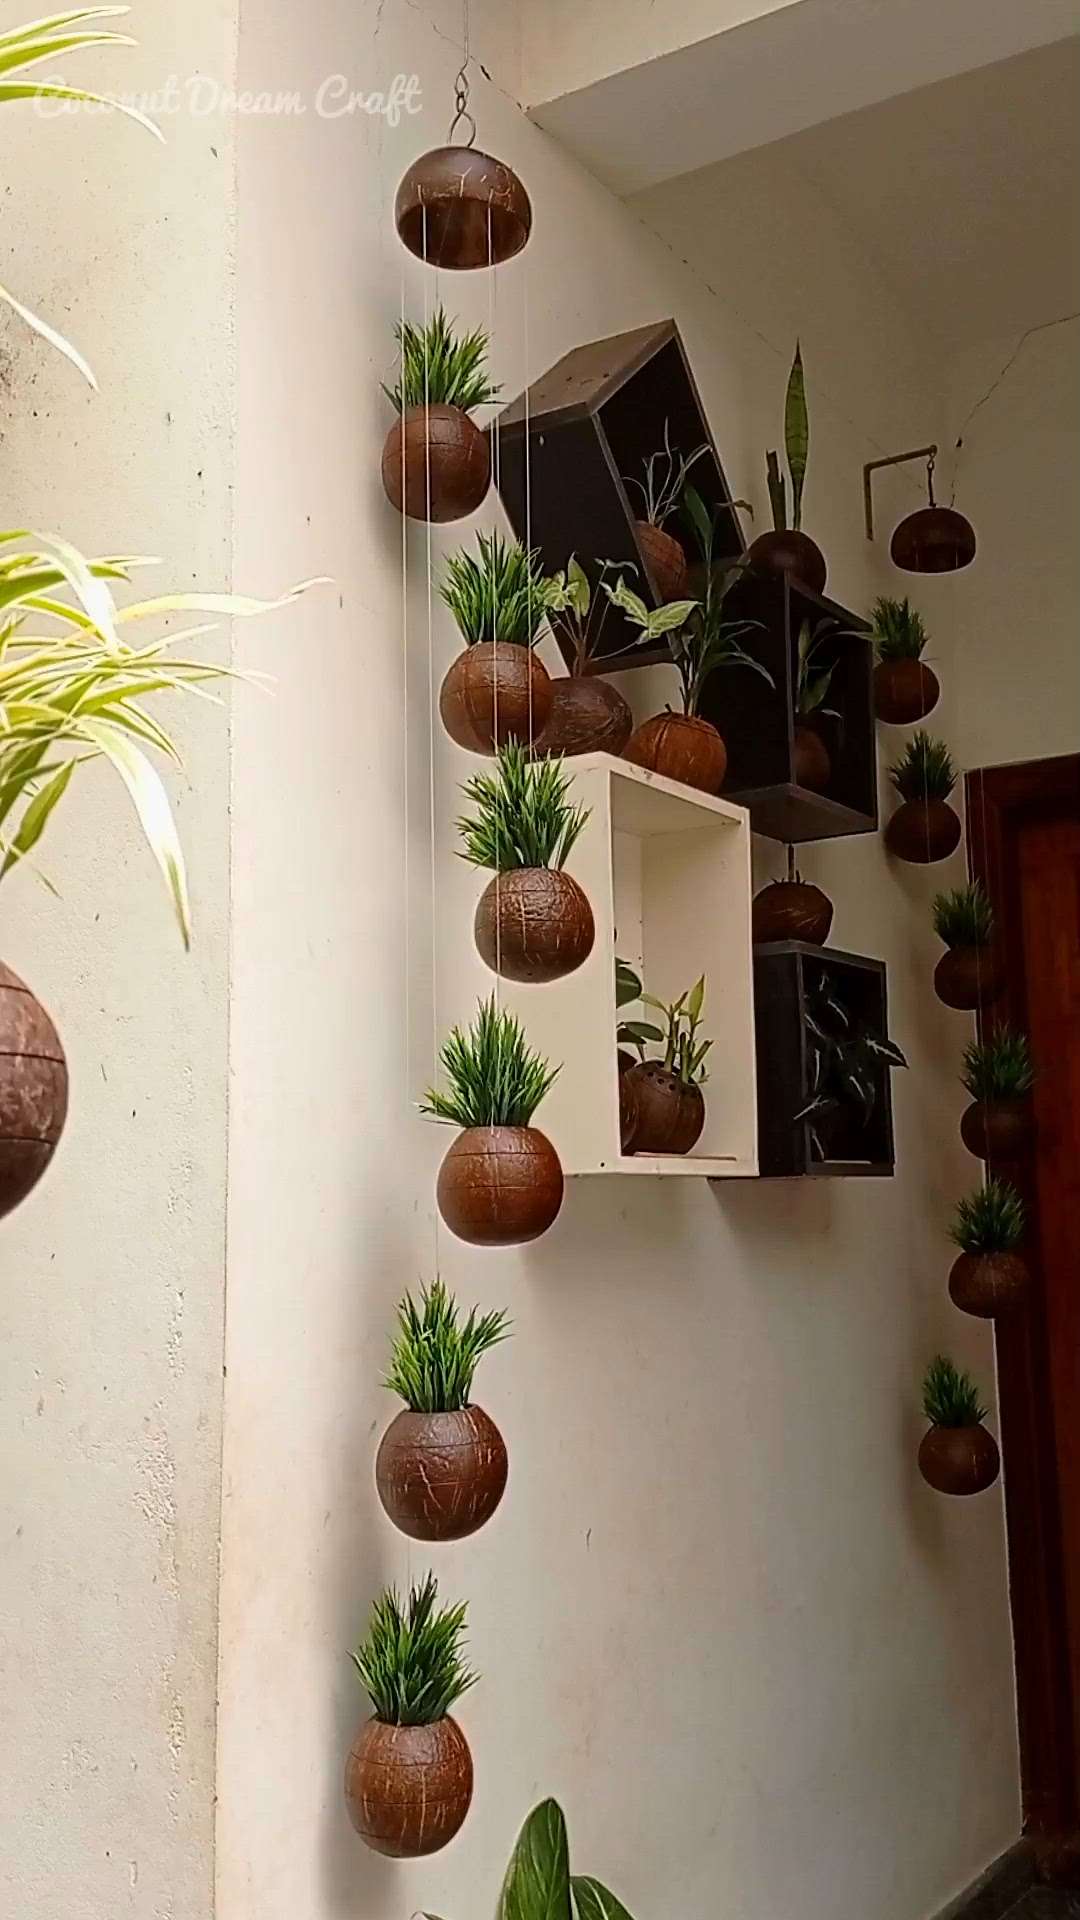 Spiral hanging planter set out of coconut...

Hello sir/ma'am...

We are the manufacturers of coconut traditional lights and other utensils,decors for life time use... Coconut shell is a non-degradable raw material so we promise life time guarantee for all stuff...

We having high standard and exclusive products for resorts, hotels, home interior and reselling... 

Coconut Dream Craft
Ph:9947687474